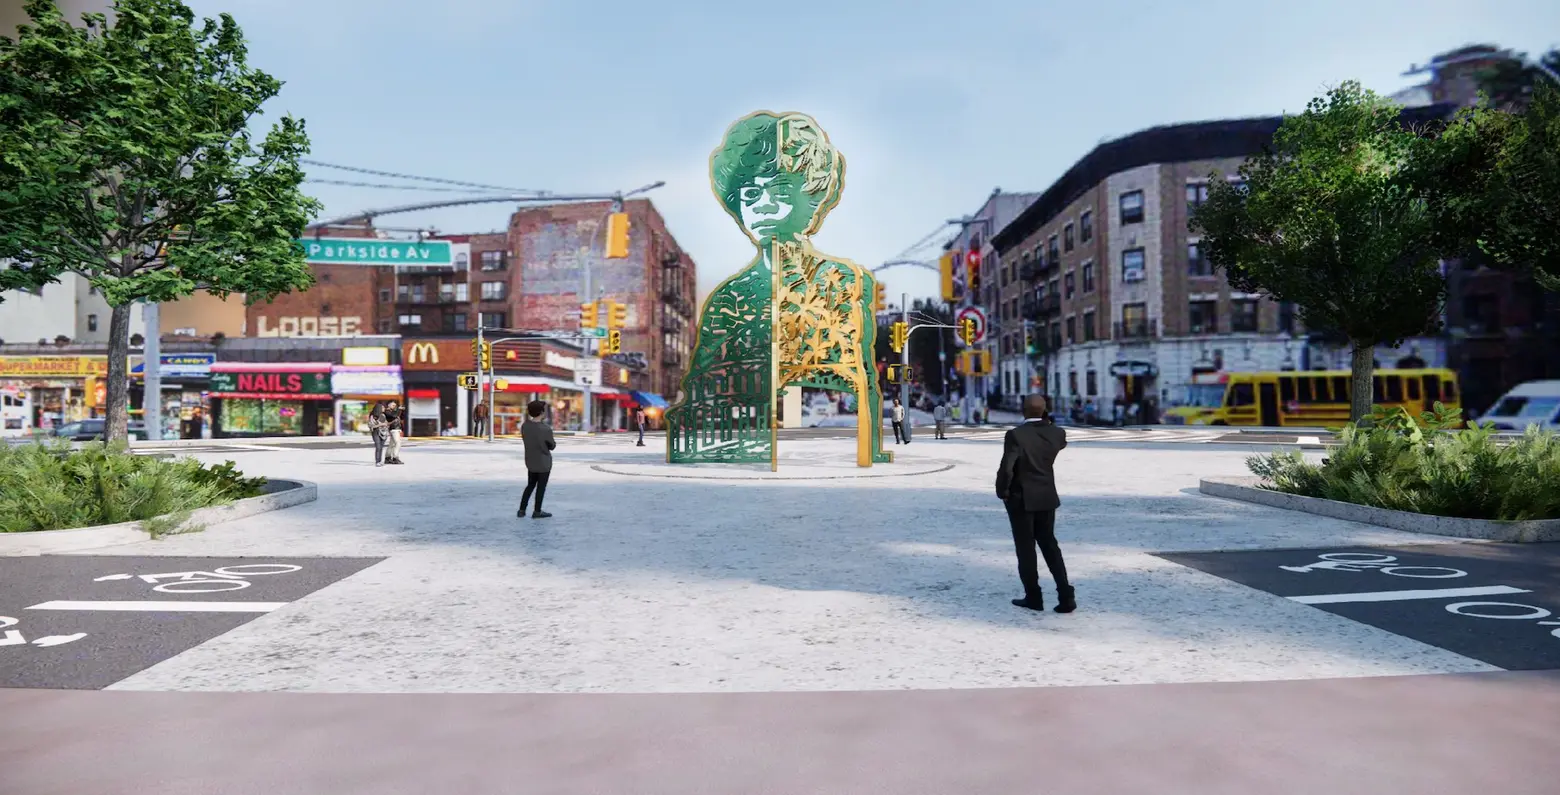 City revives ‘She Built NYC,’ launches open call for artists to design four statues of women